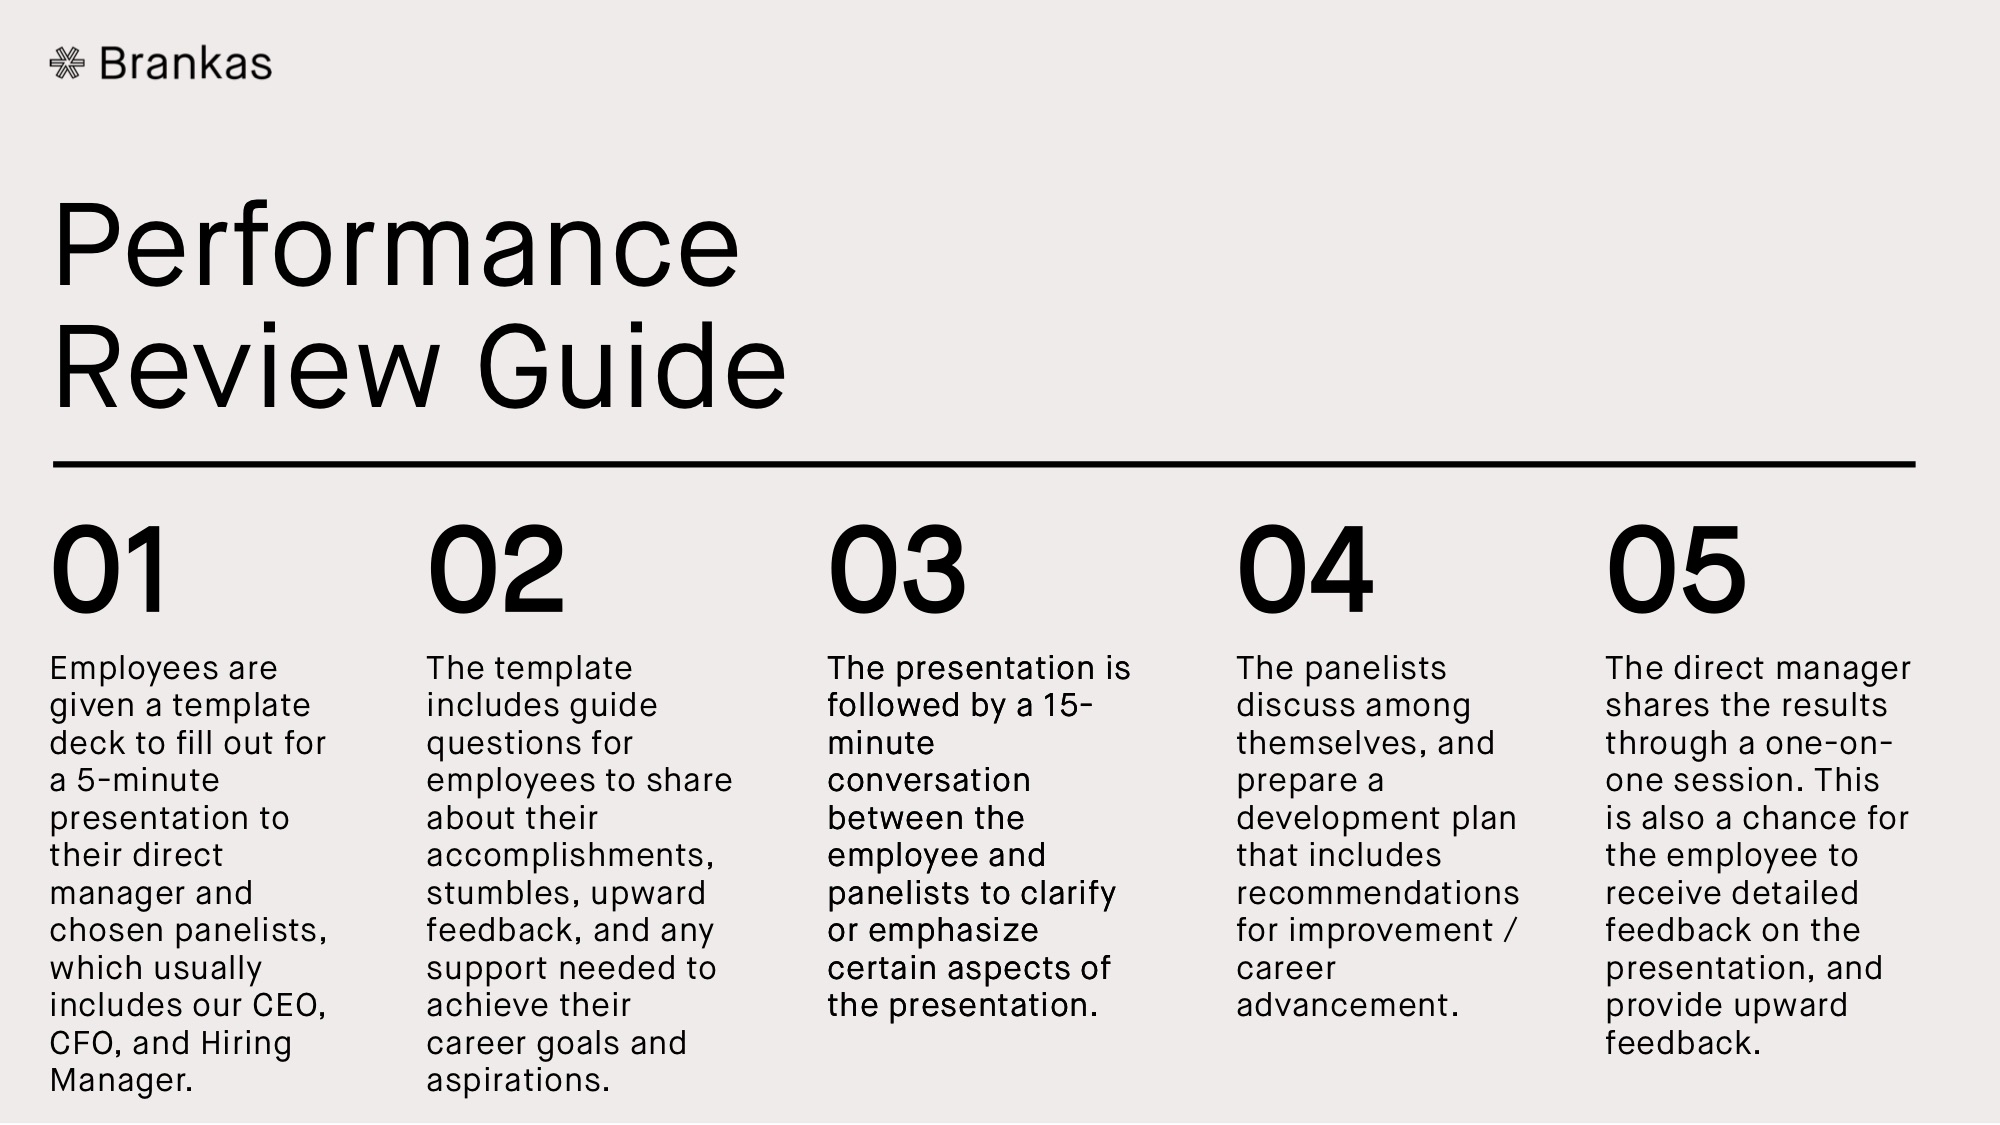 Performance Review Guide